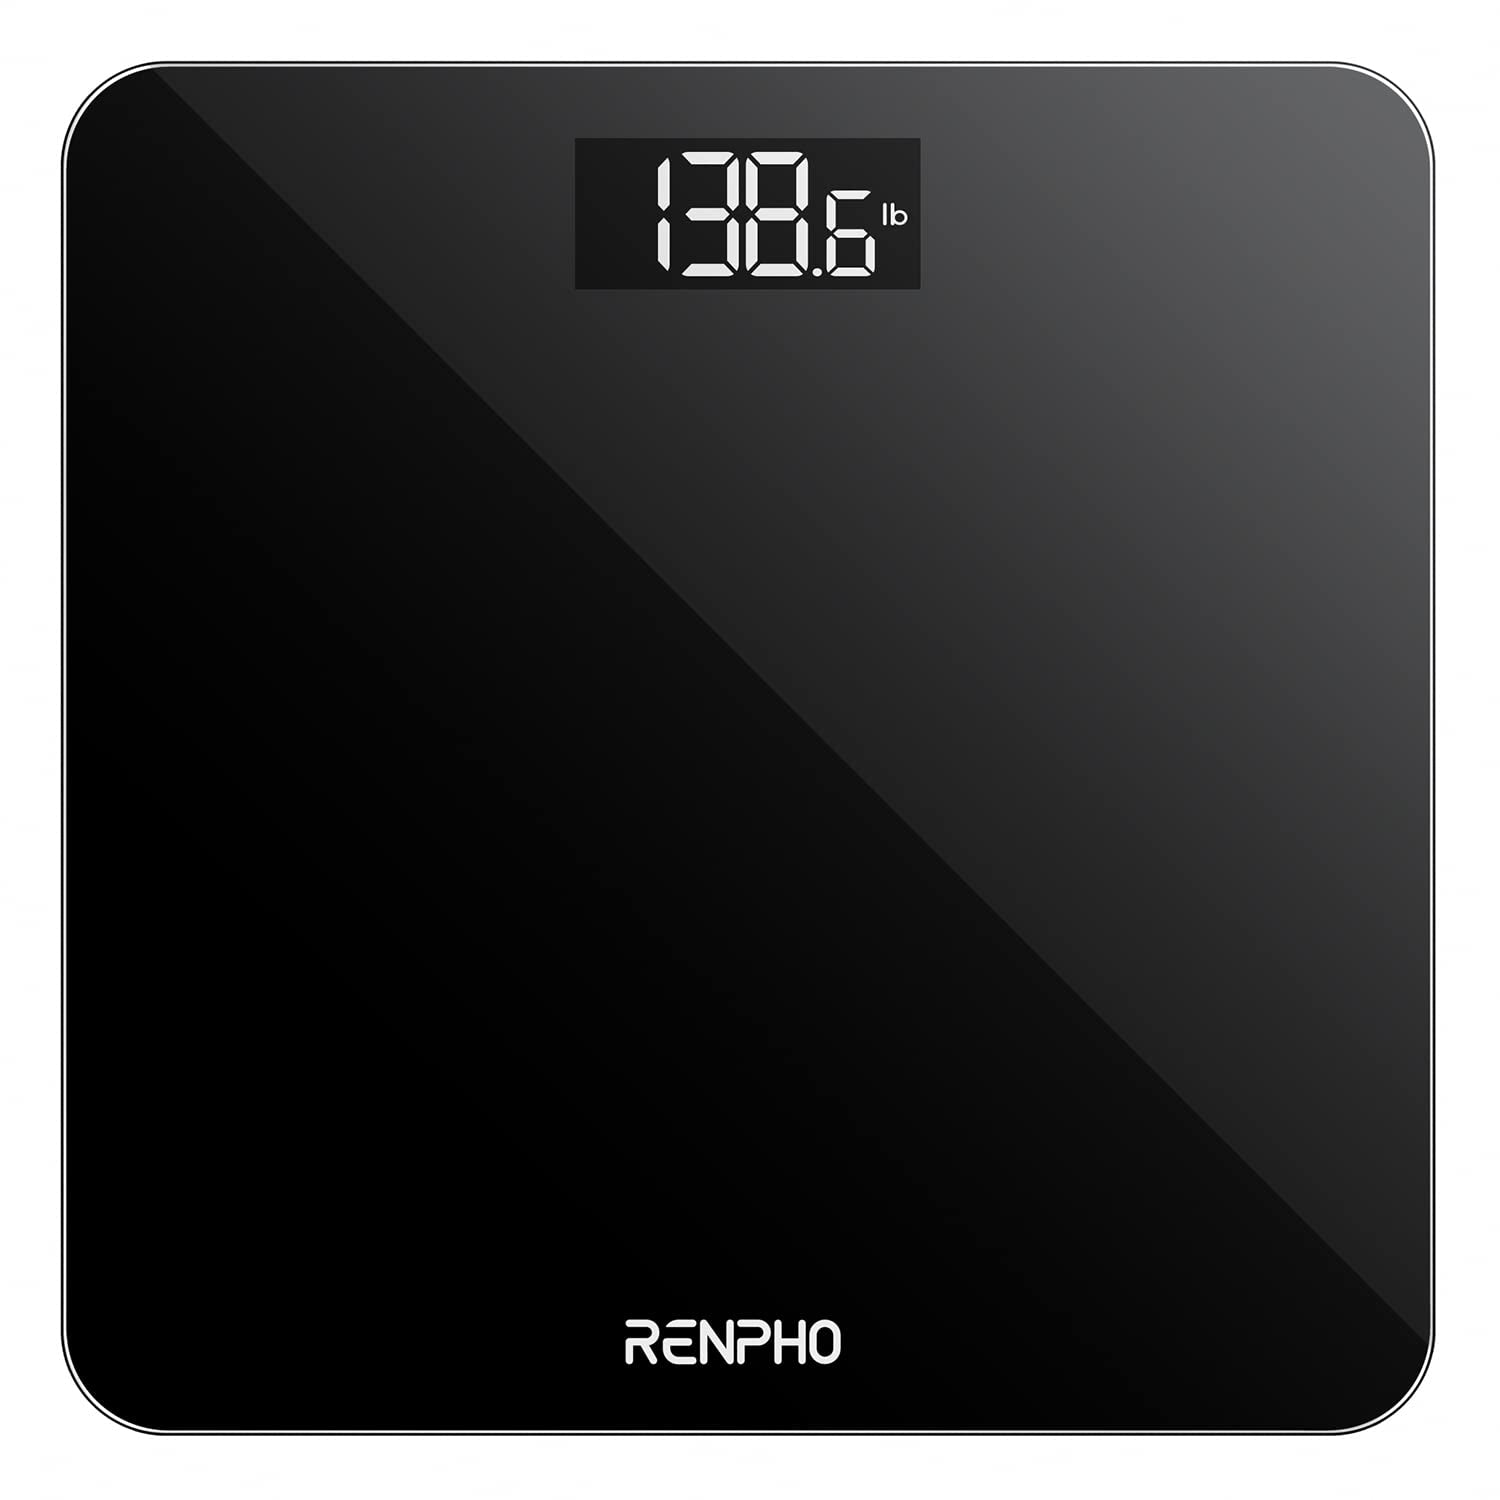 Digital Bathroom Scale, Highly Accurate Body Weight Scale with Lighted LED Display, round Corner Design, 400 Lb, Black-Core 1S